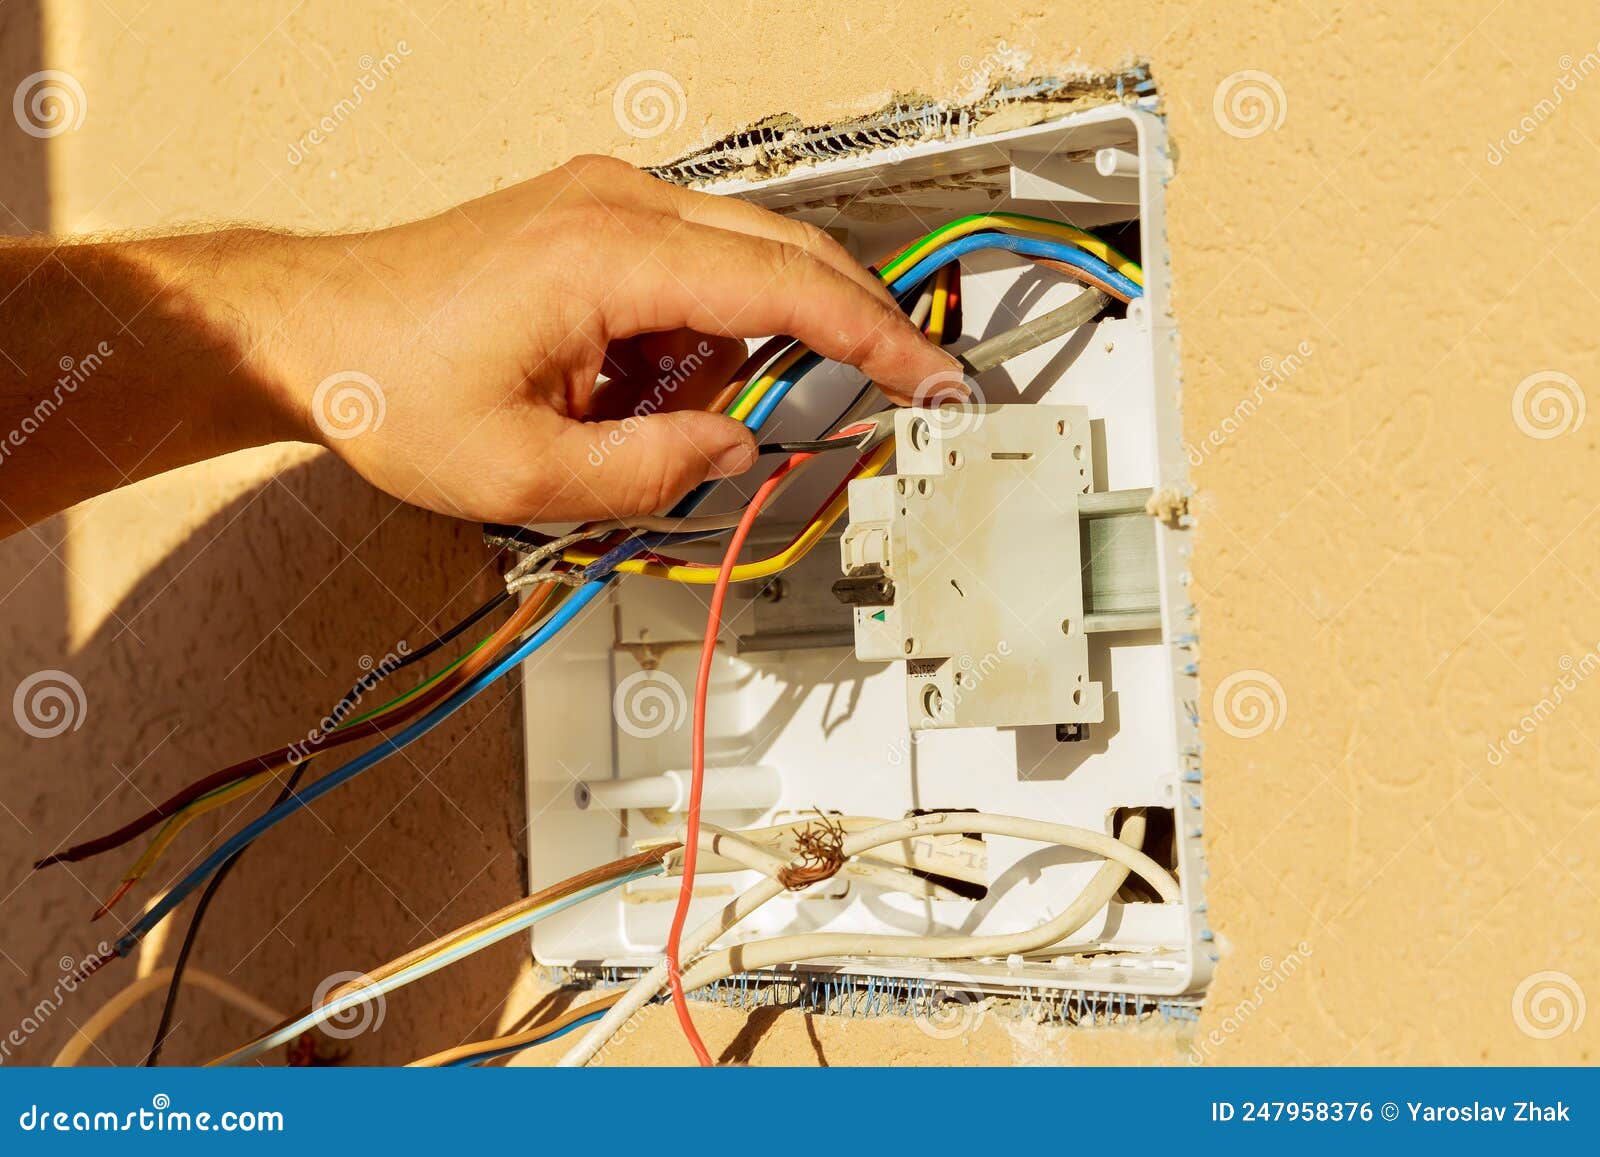 panel with electrical equipment. the electrician installs circuit breakers.